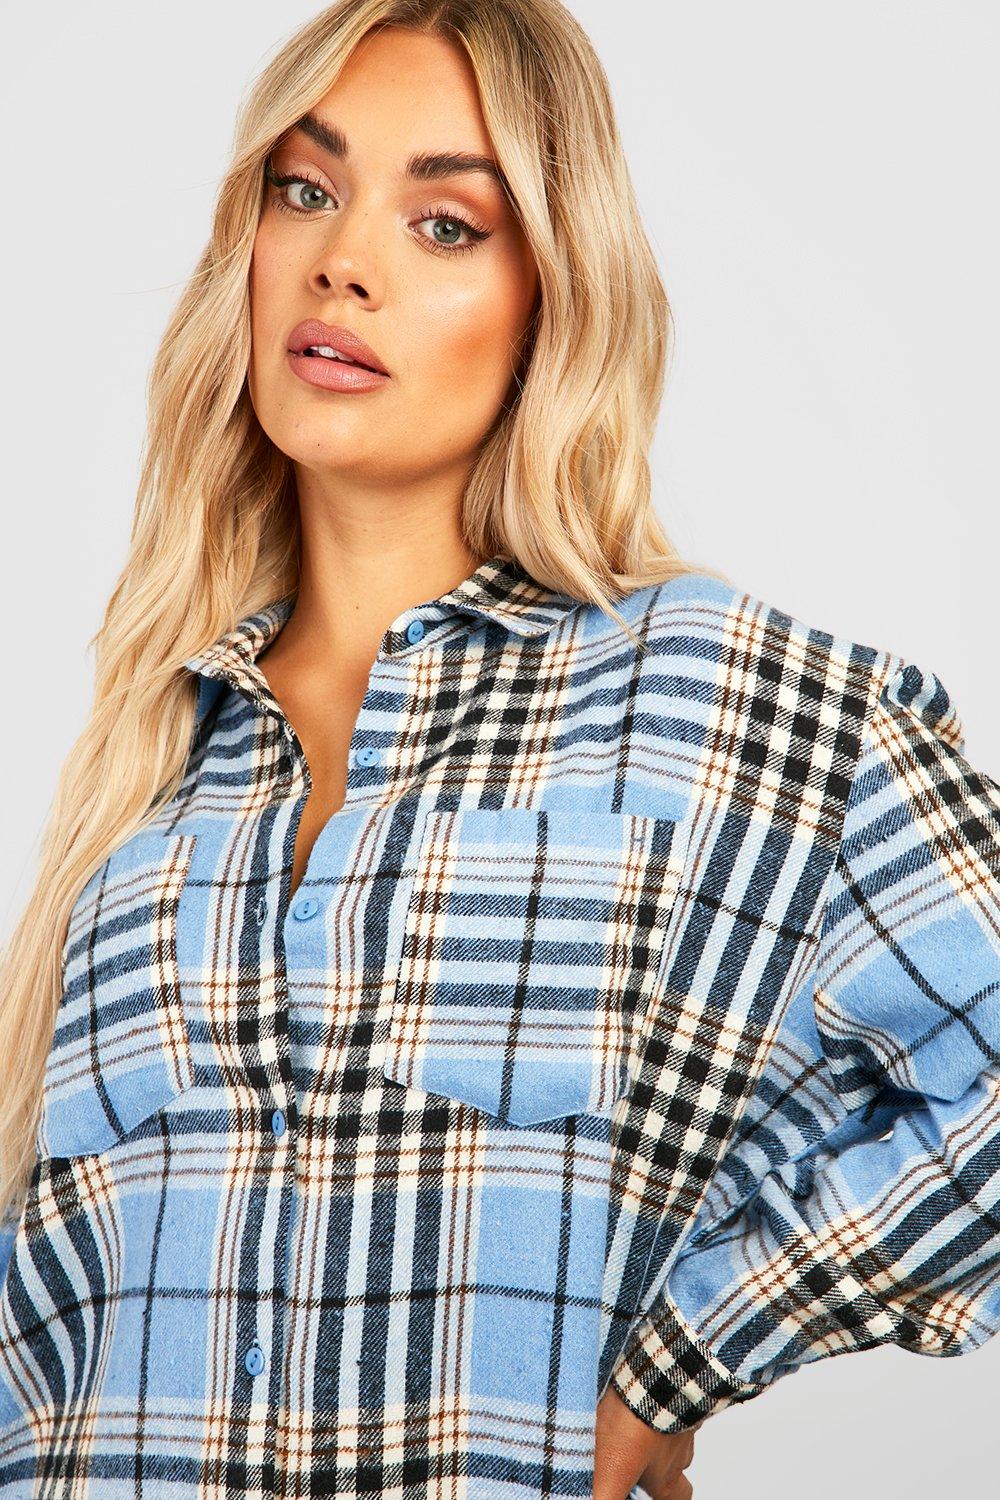 AMBIANCE PLUS SIZE WOMEN CHECKERED SHIRT STYLE 73219-1XL - Oly's